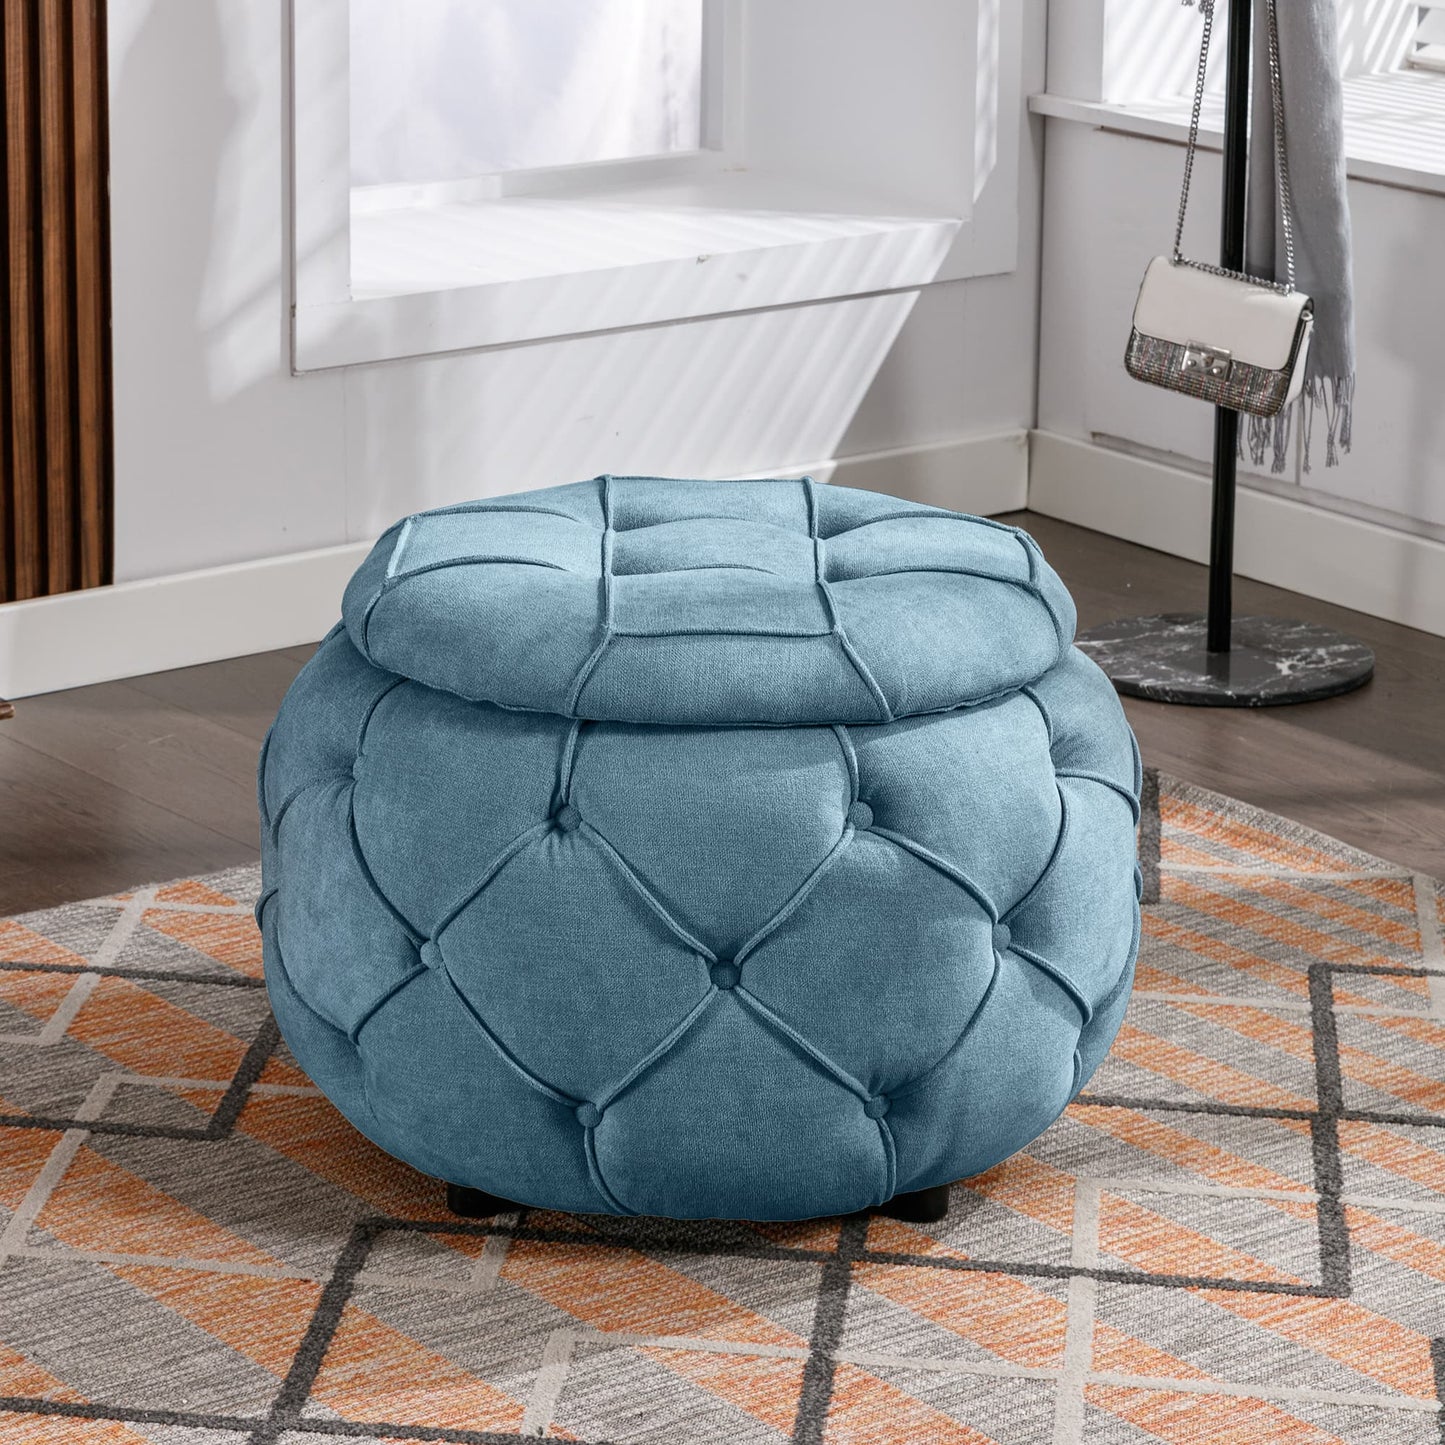 SogesPower Large Button Tufted Woven Round Storage Ottoman for Living Room & Bedroom,17.7"H Burlap Blue